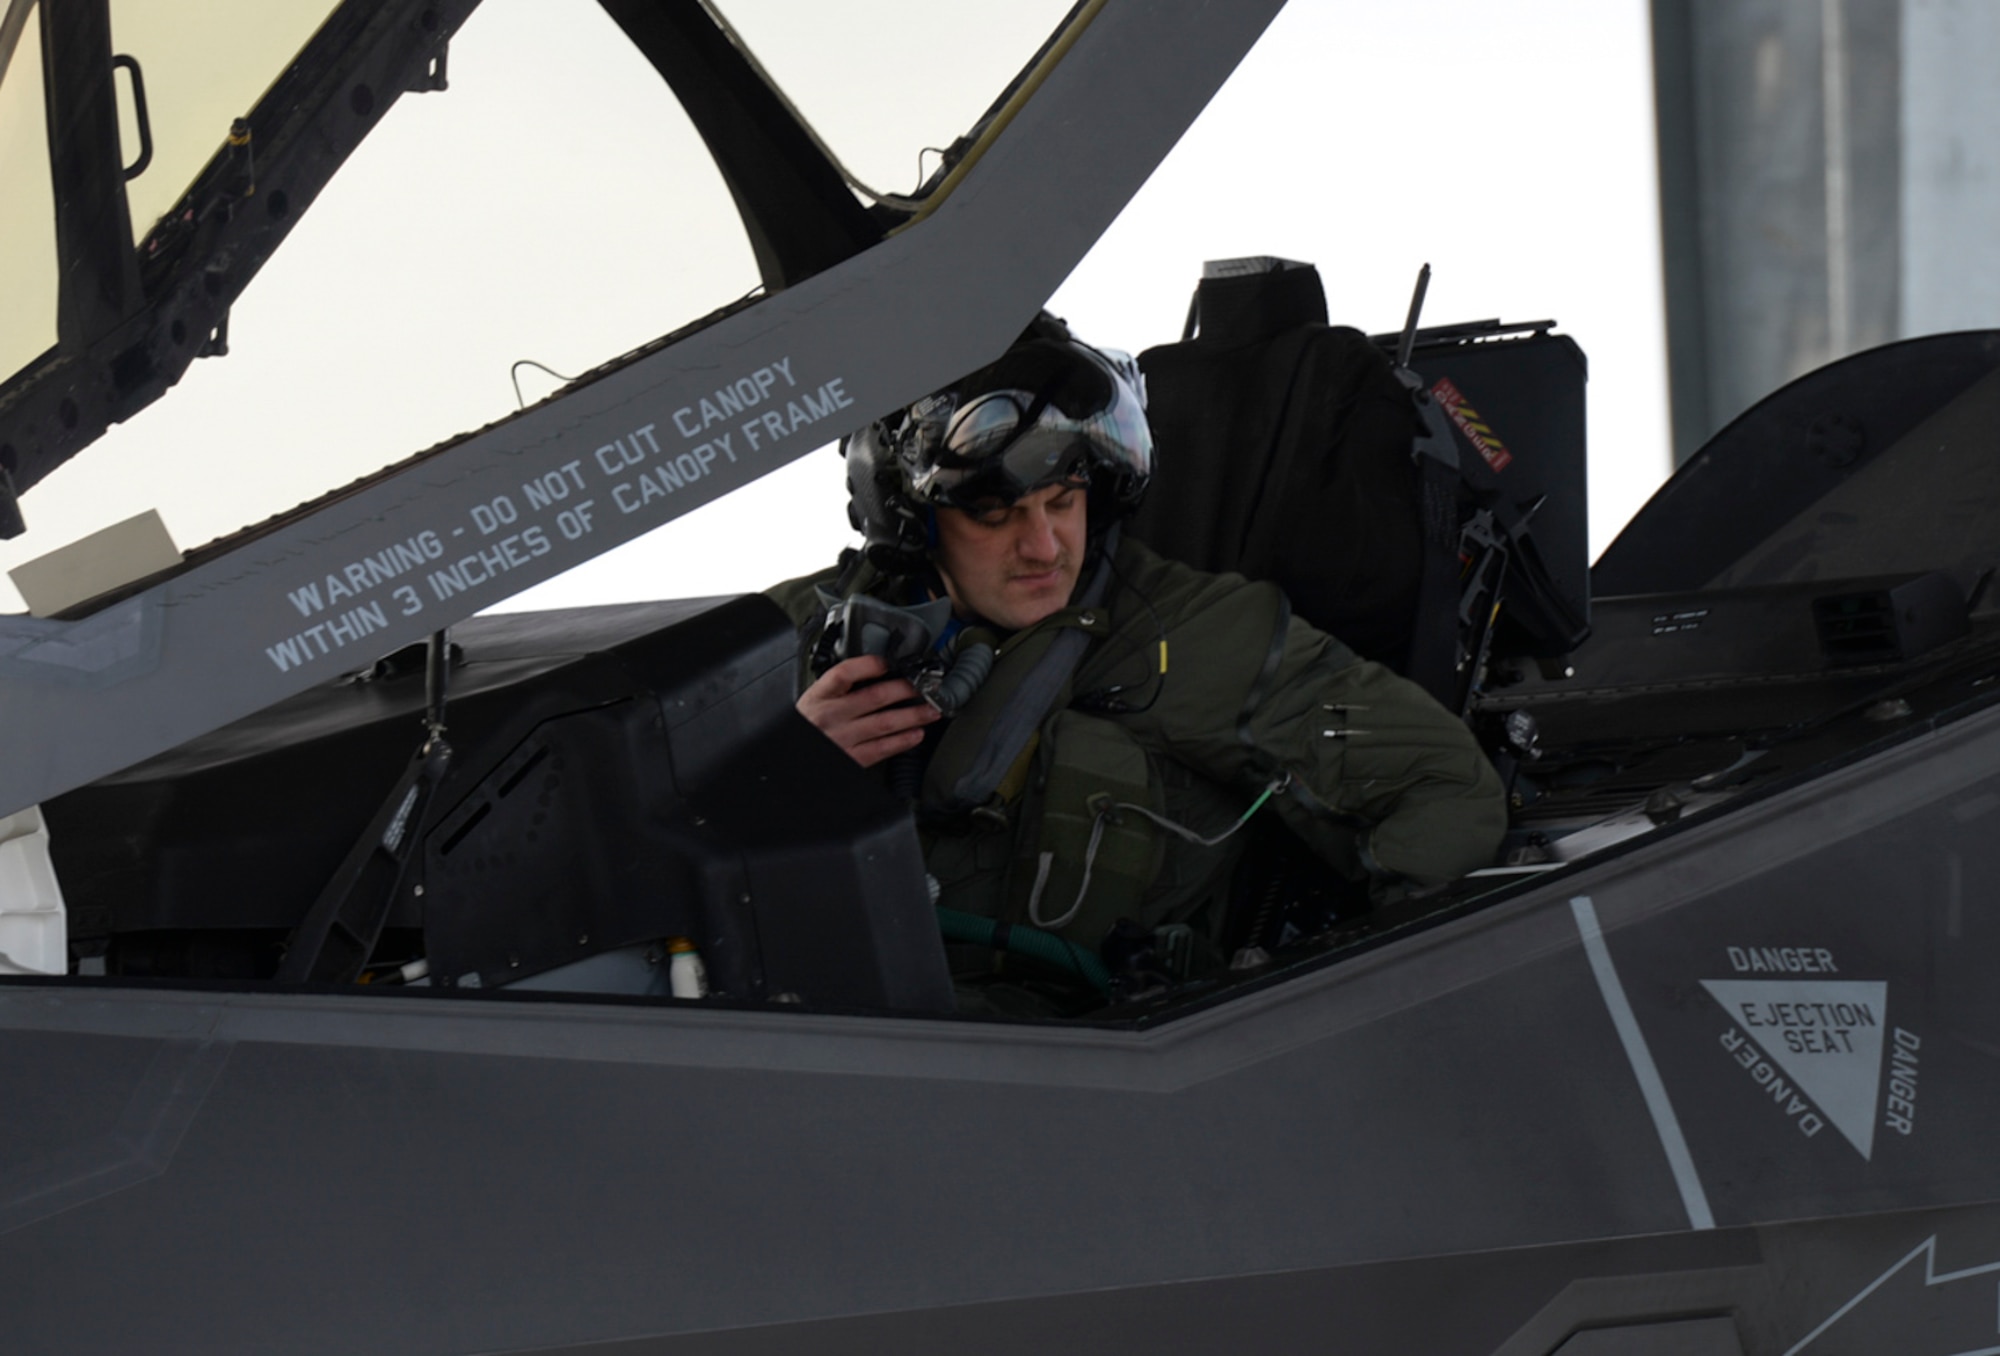 Maj. Ethan Sabin, 31st Test and Evaluation Squadron assistant director of operations, settles into the cockpit of an F-35A at Mountain Home Air Force Base, Idaho, Feb. 12, 2016. Sabin is assigned to the 31st TES from Edwards AFB, Calif., which is part of the 53rd Wing headquartered at Eglin AFB, Fla. (U.S. Air Force photo by Airman 1st Class Jessica H. Evans/RELEASED)